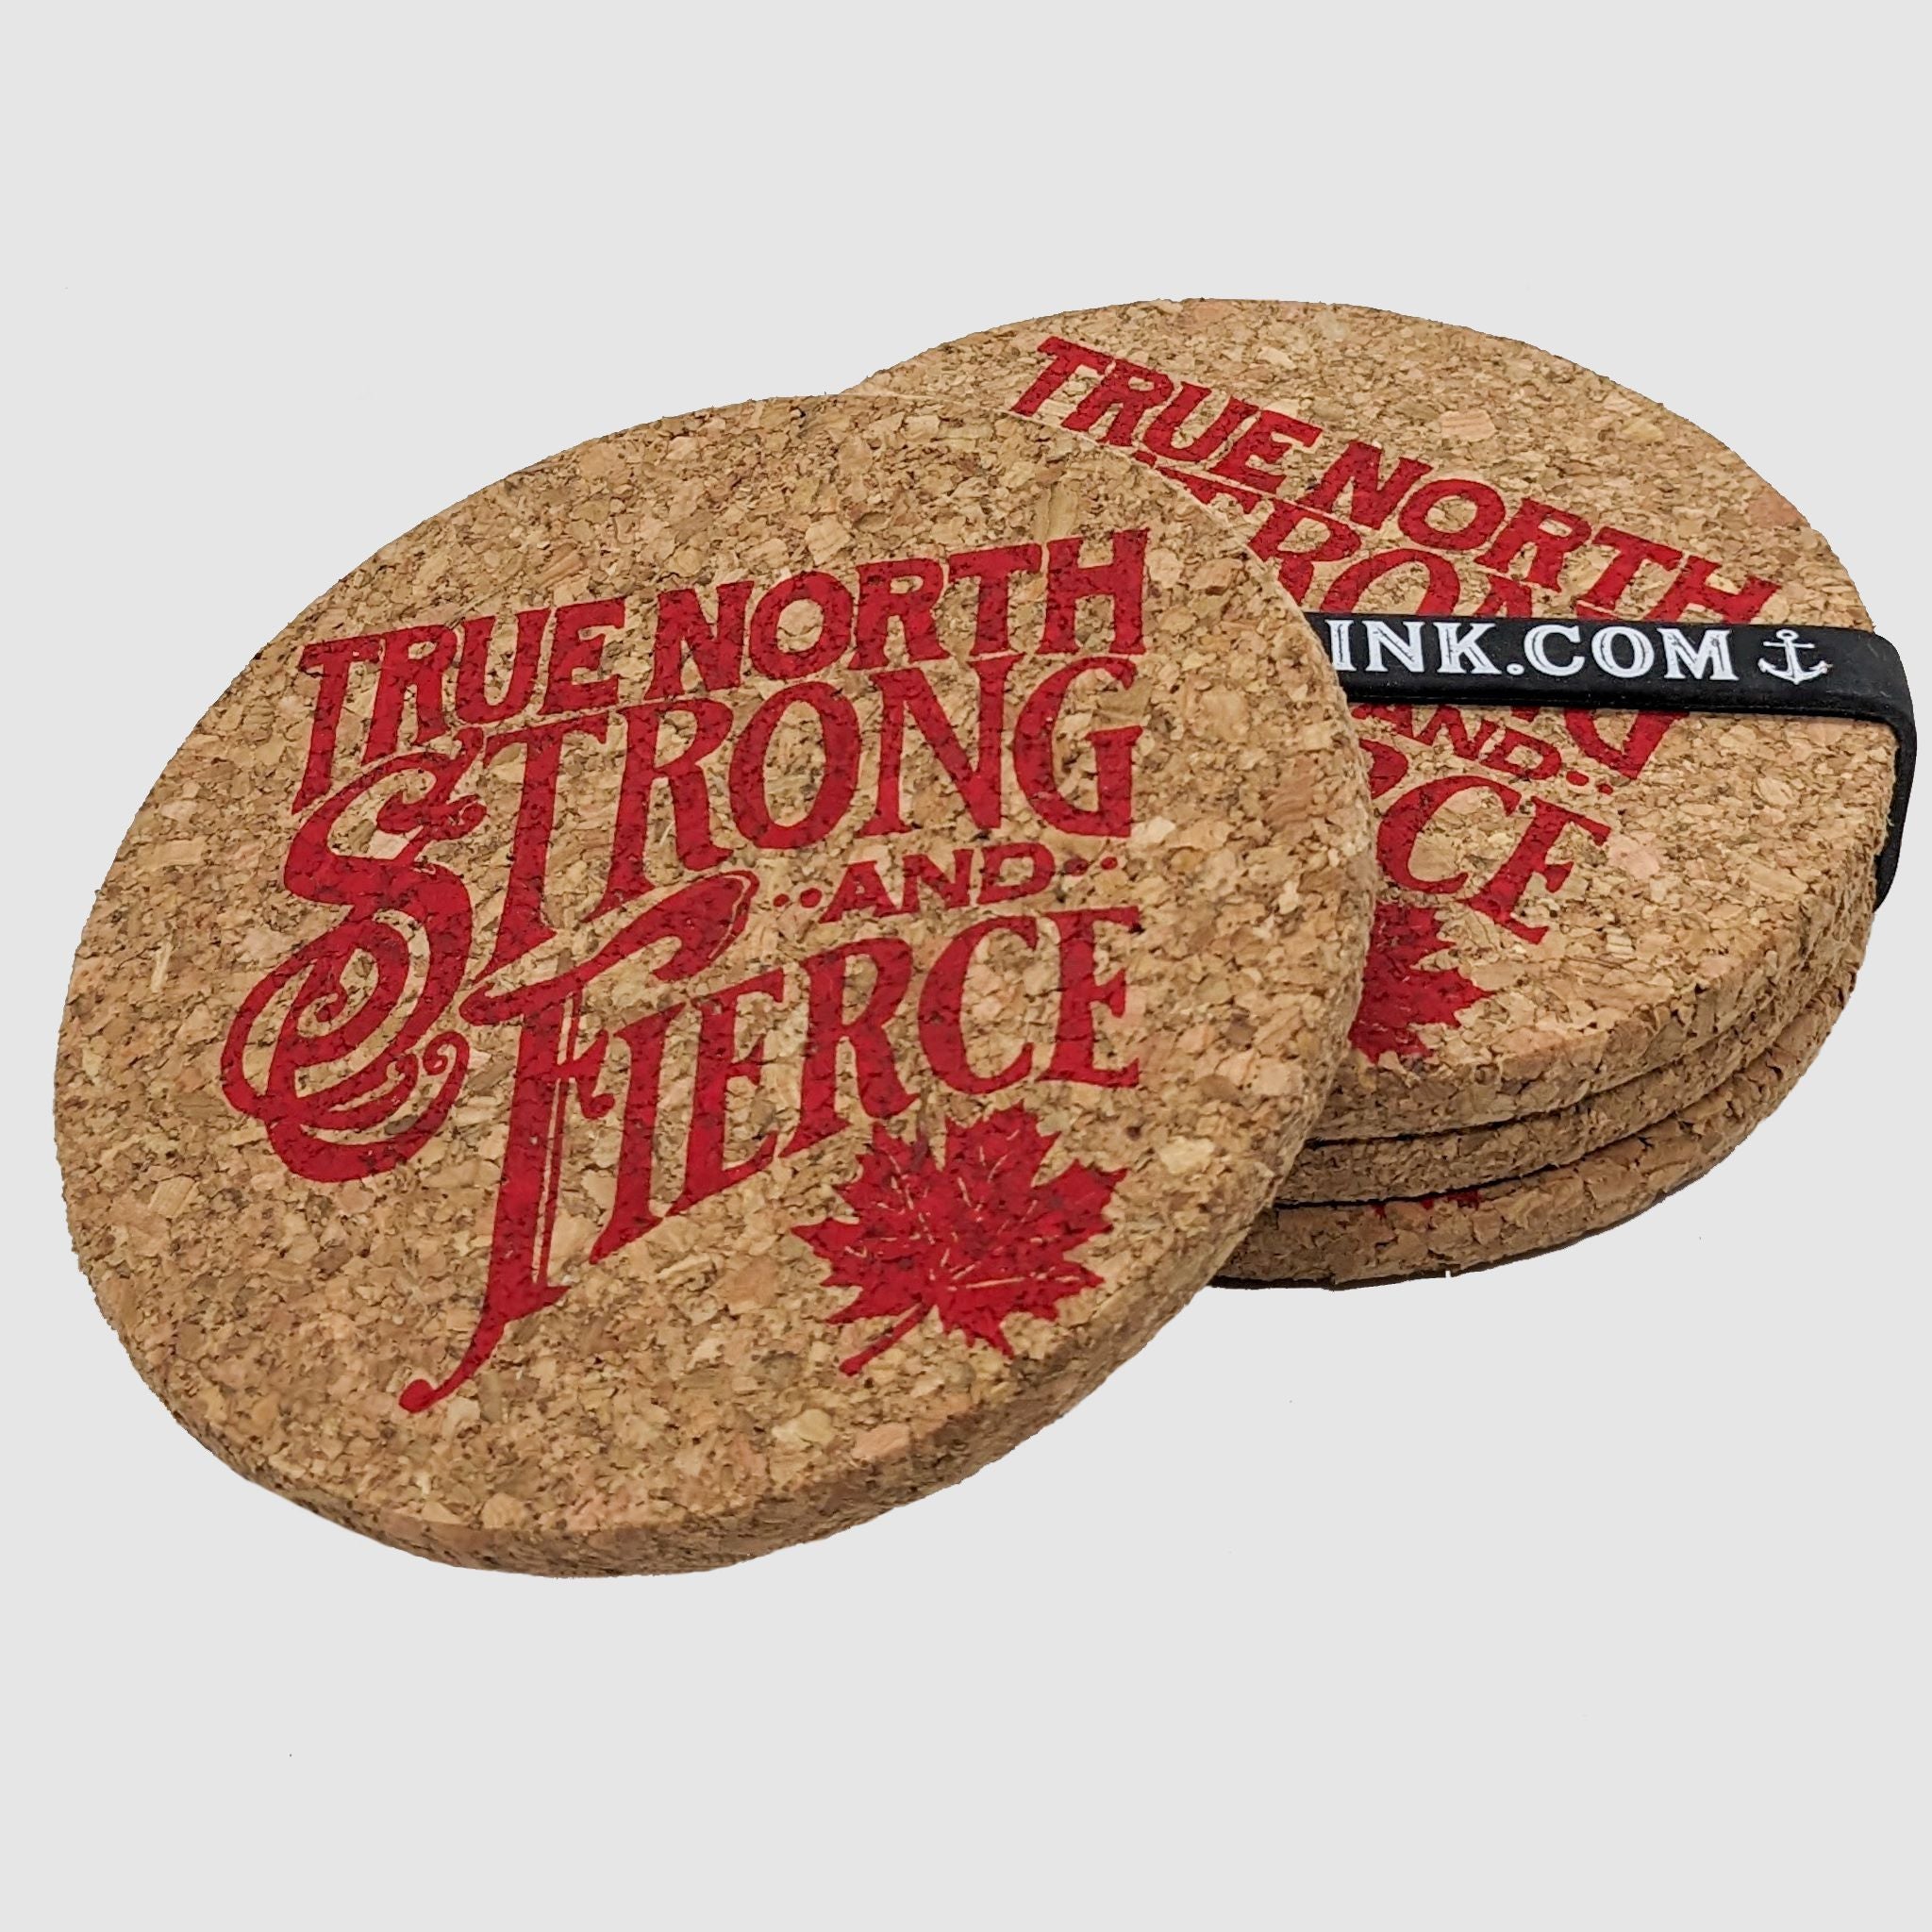 True North Strong & Fierce Coasters